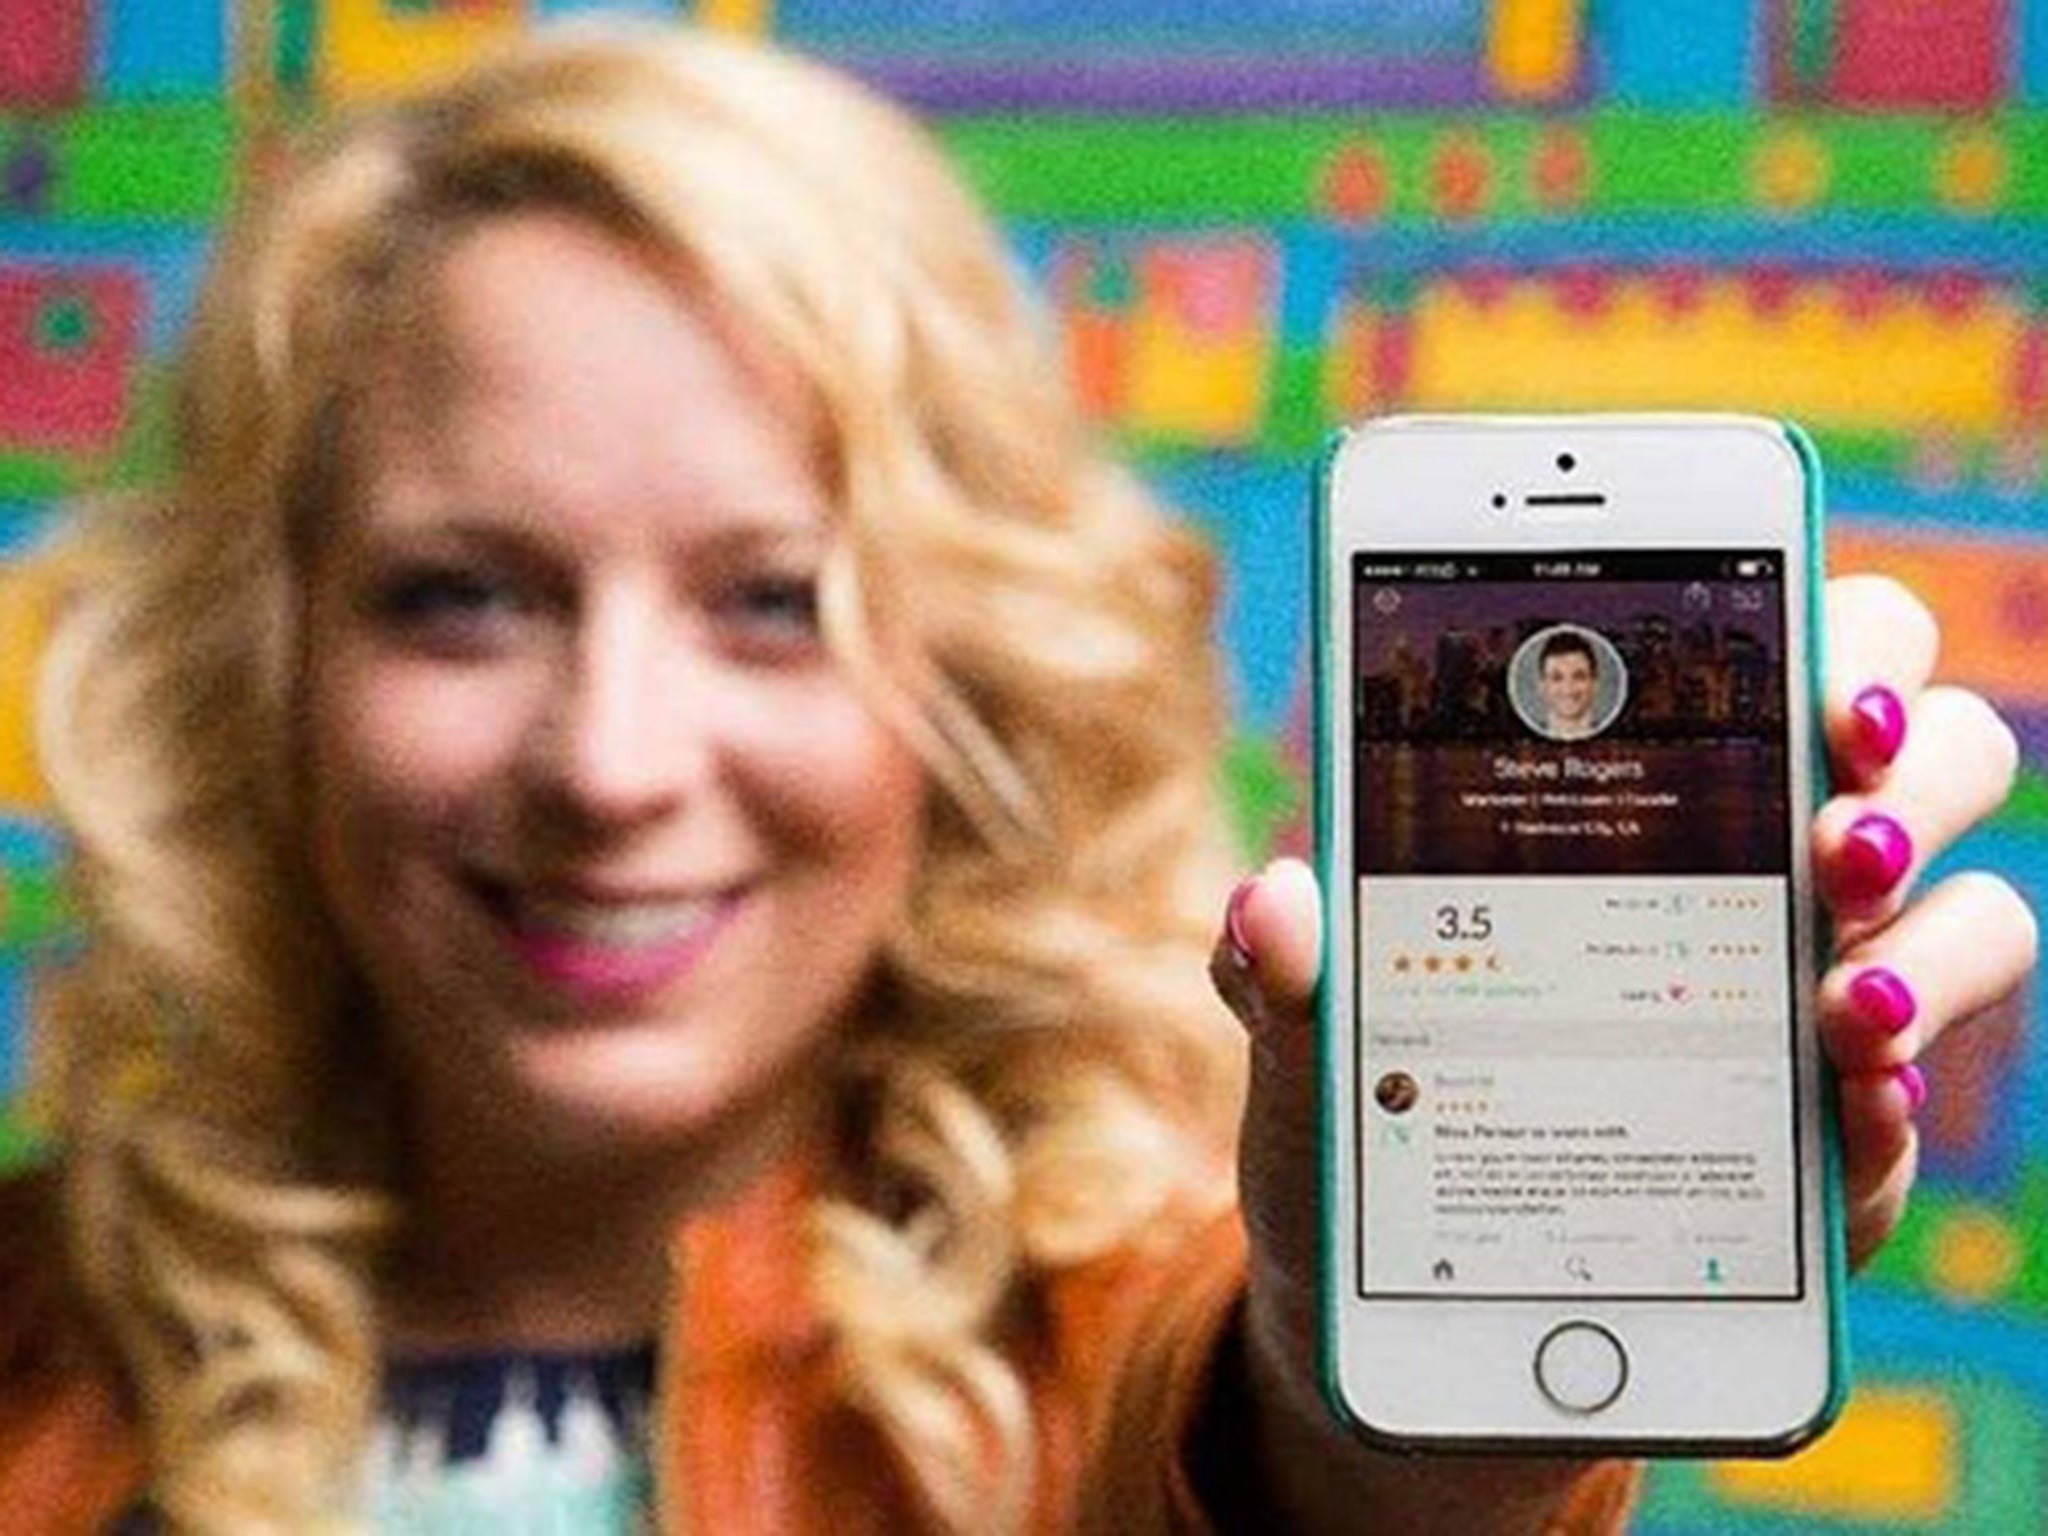 App Peeple lets you rate people out of 5